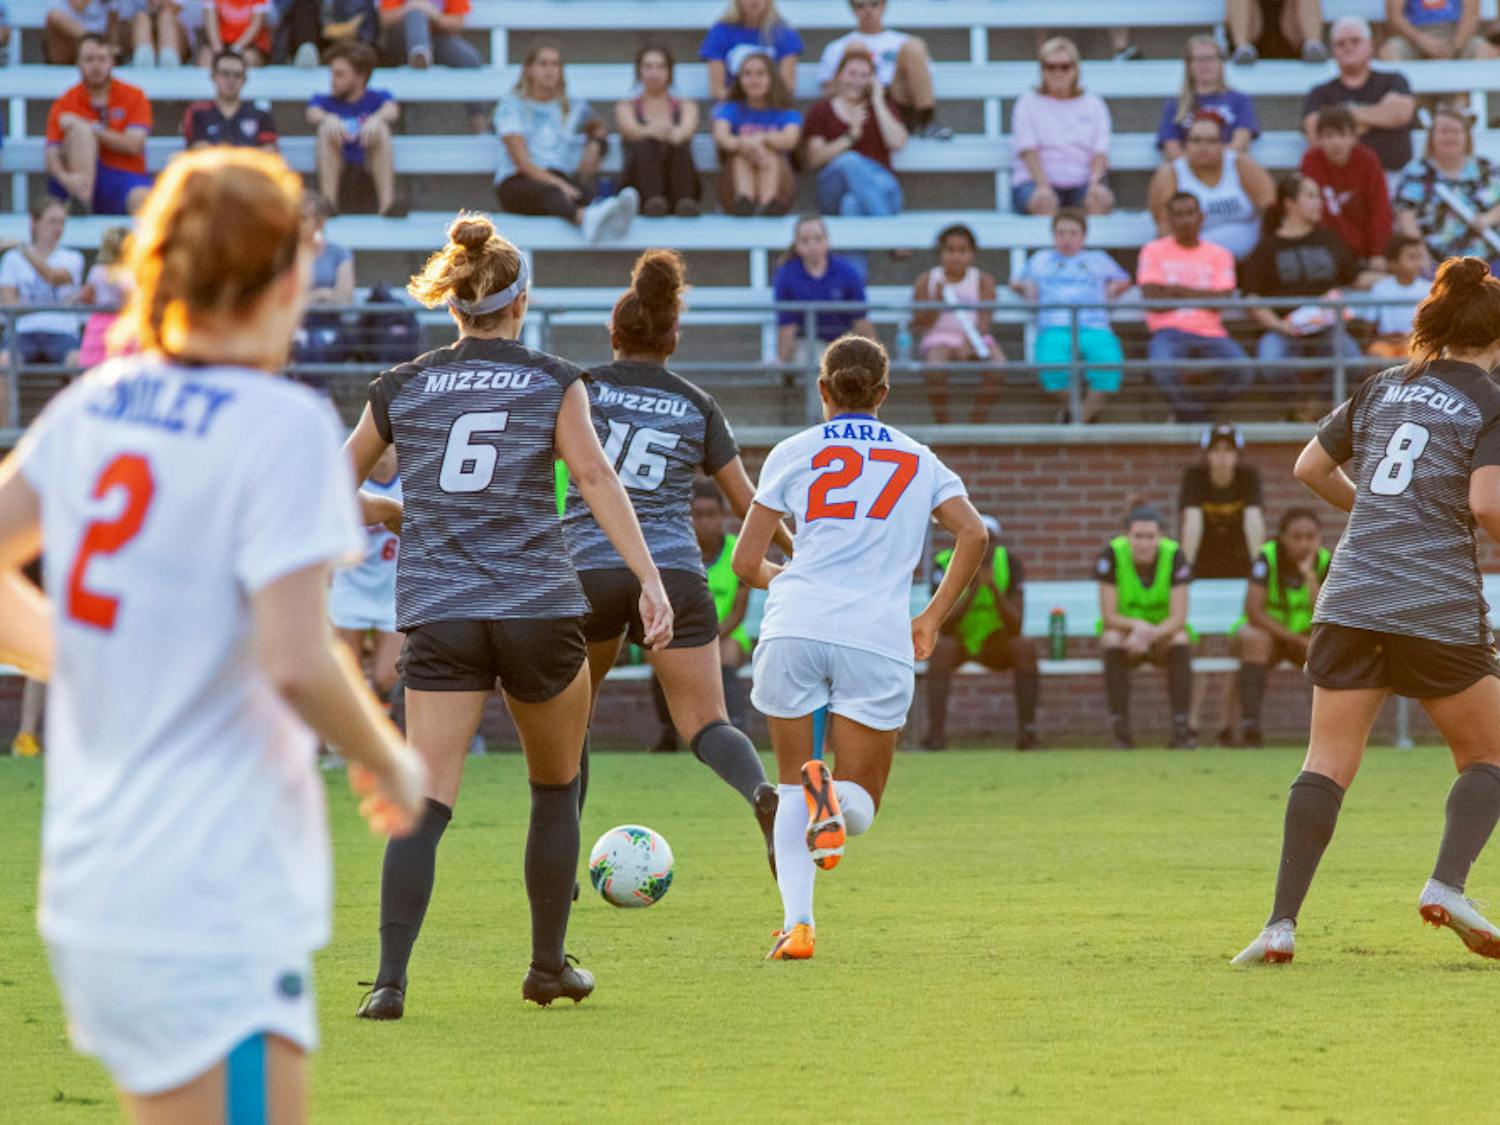 Forward Vanessa Kara scored the first goal against the Tigers Thursday night. It was her sixth goal in the last four matches.